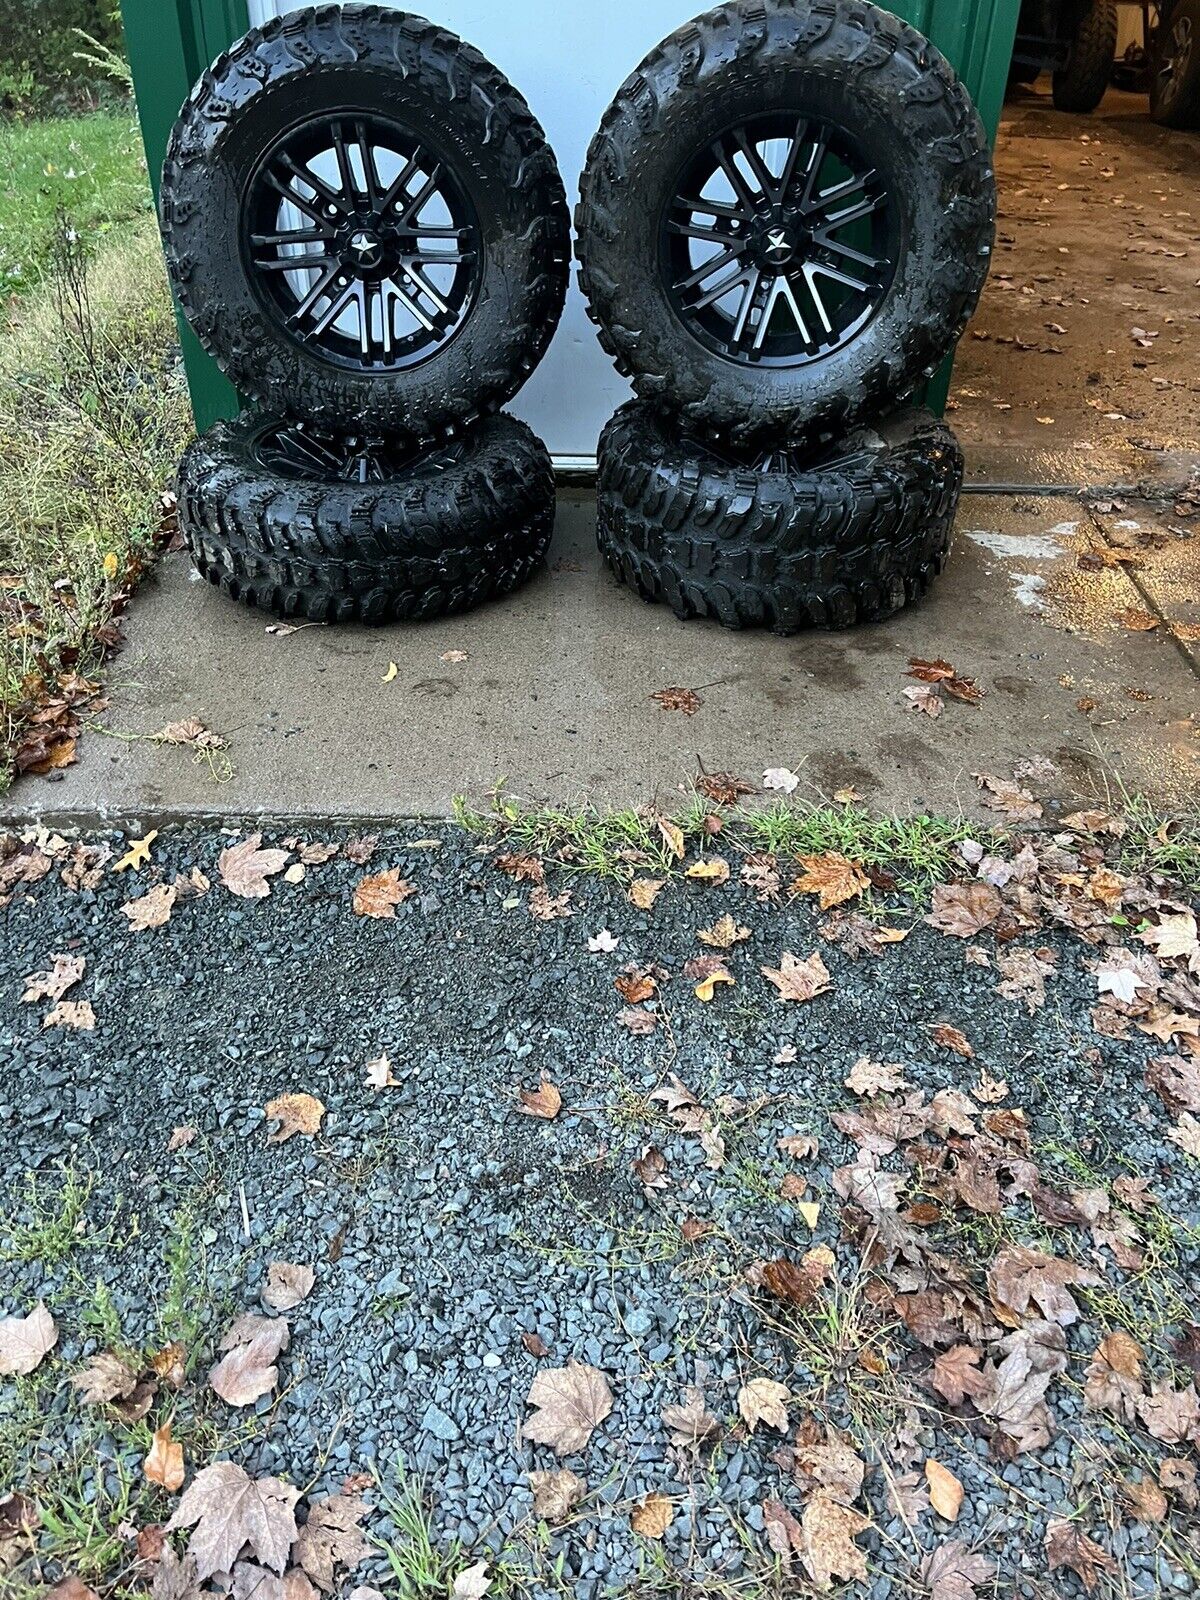 Polairs Sportsman 550/850 Wheels And Tires